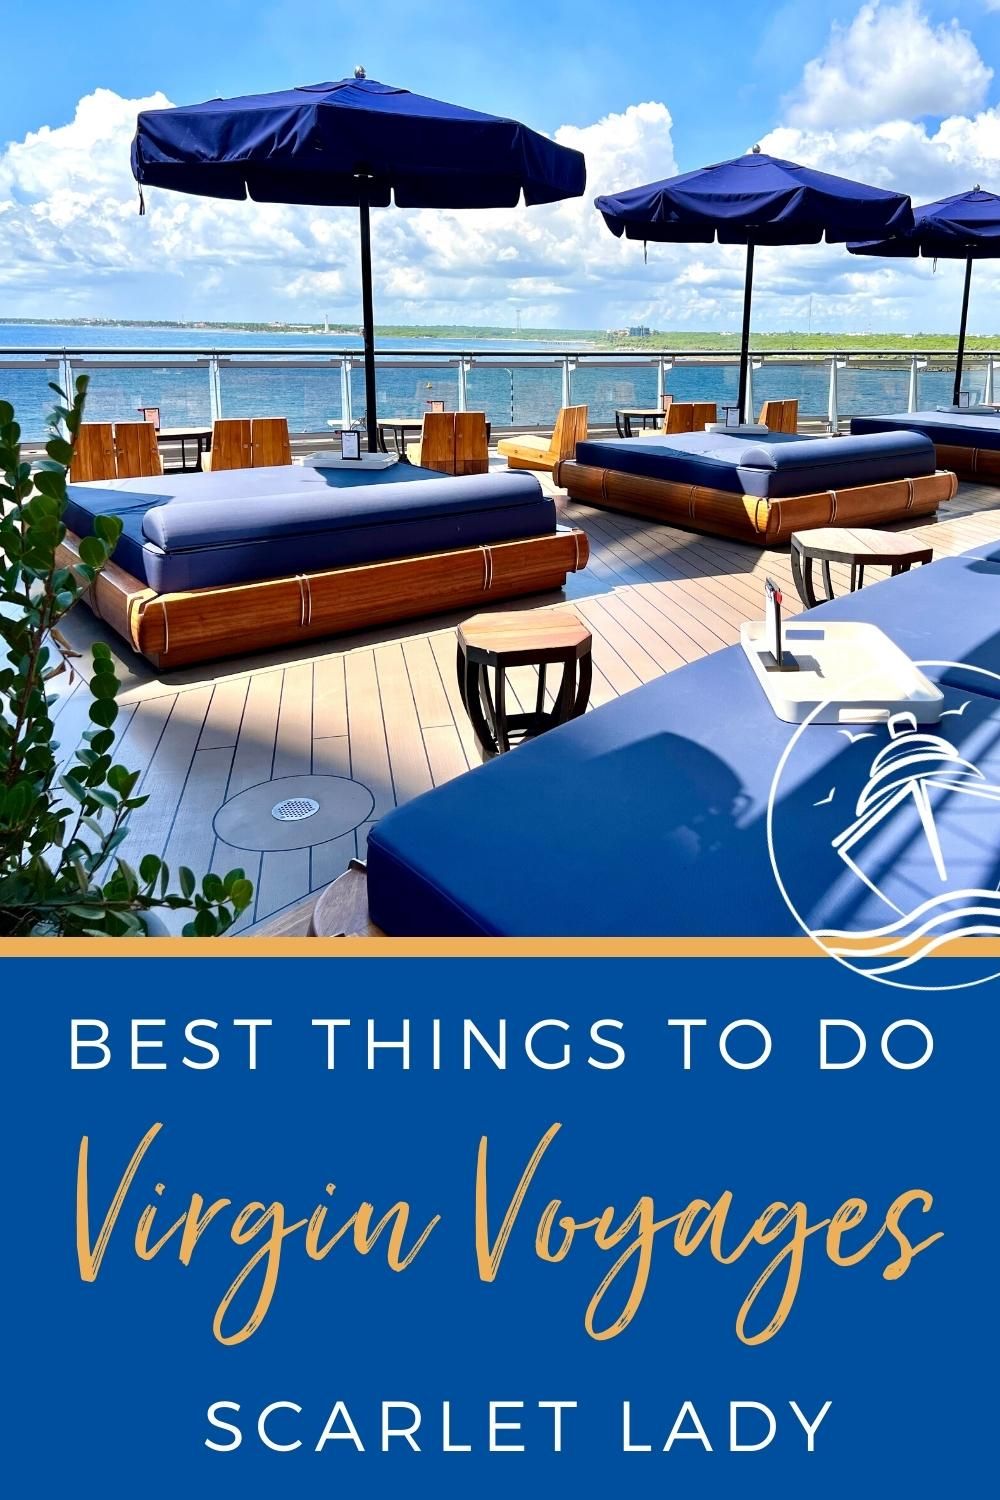 Best Things to Do on Virgin Voyages